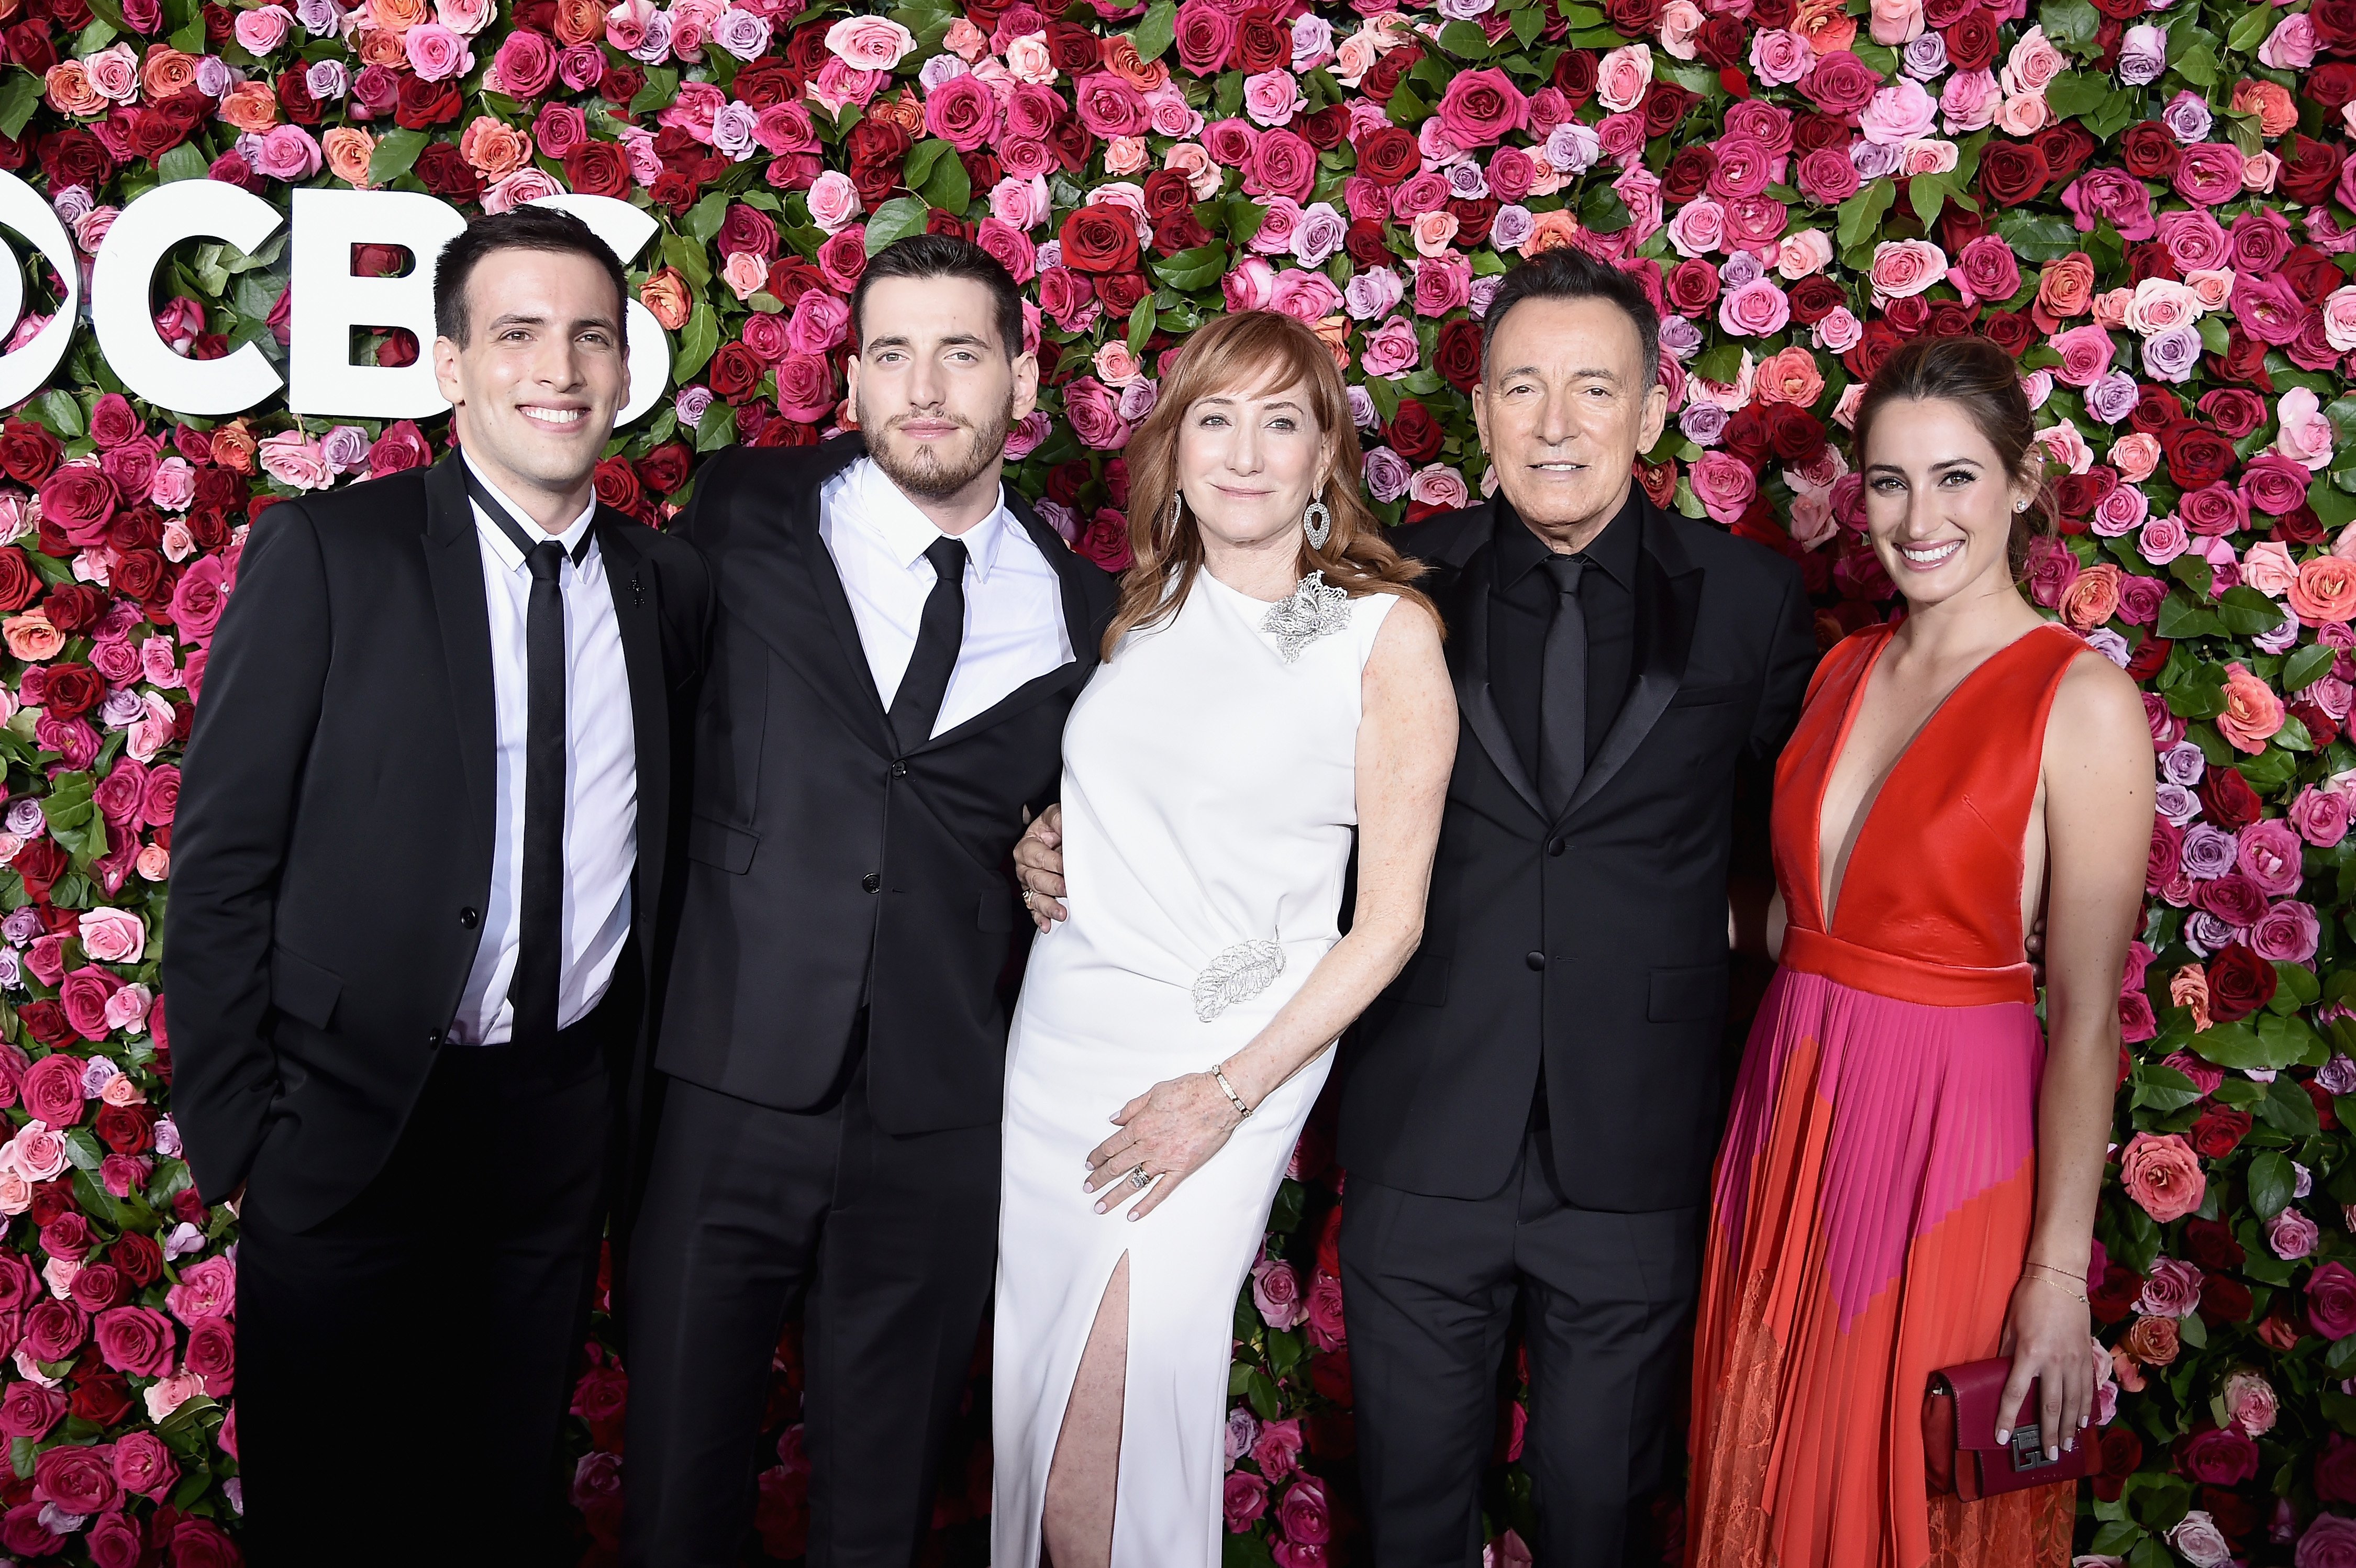 Sam Springsteen, Evan Springsteen, Patti Scialfa, Bruce Springsteen and Jessica Rae Springsteen at the 72nd Annual Tony Awards on June 10, 2018 in New York City.  |  Source: Getty Images